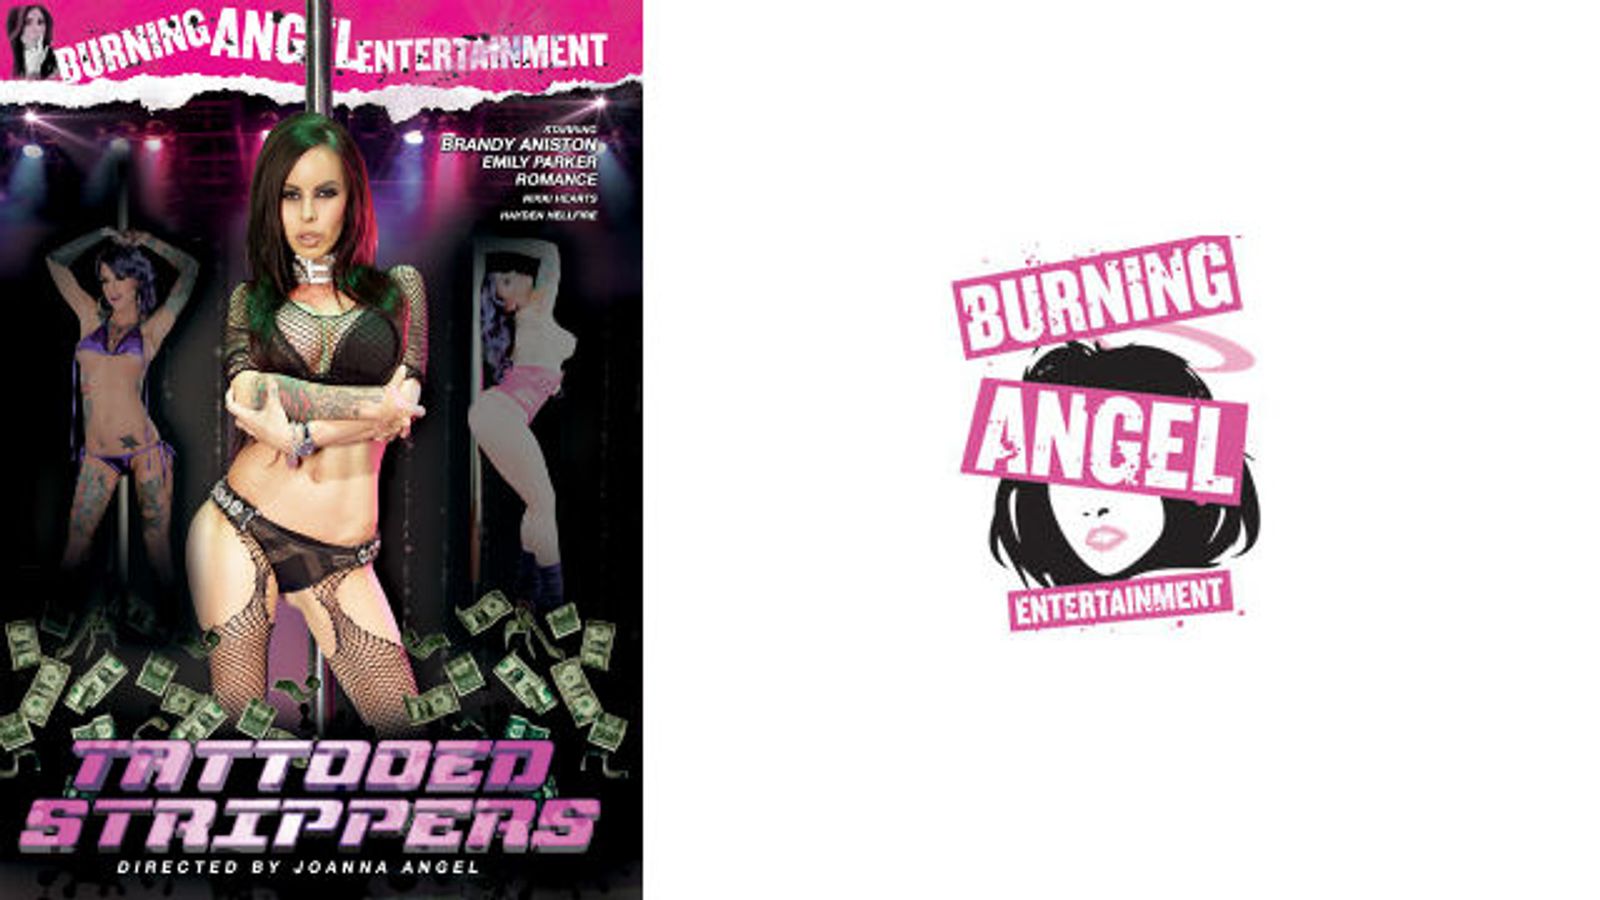 Burning Angel’s ‘Tattoed Strippers’ Available on DVD